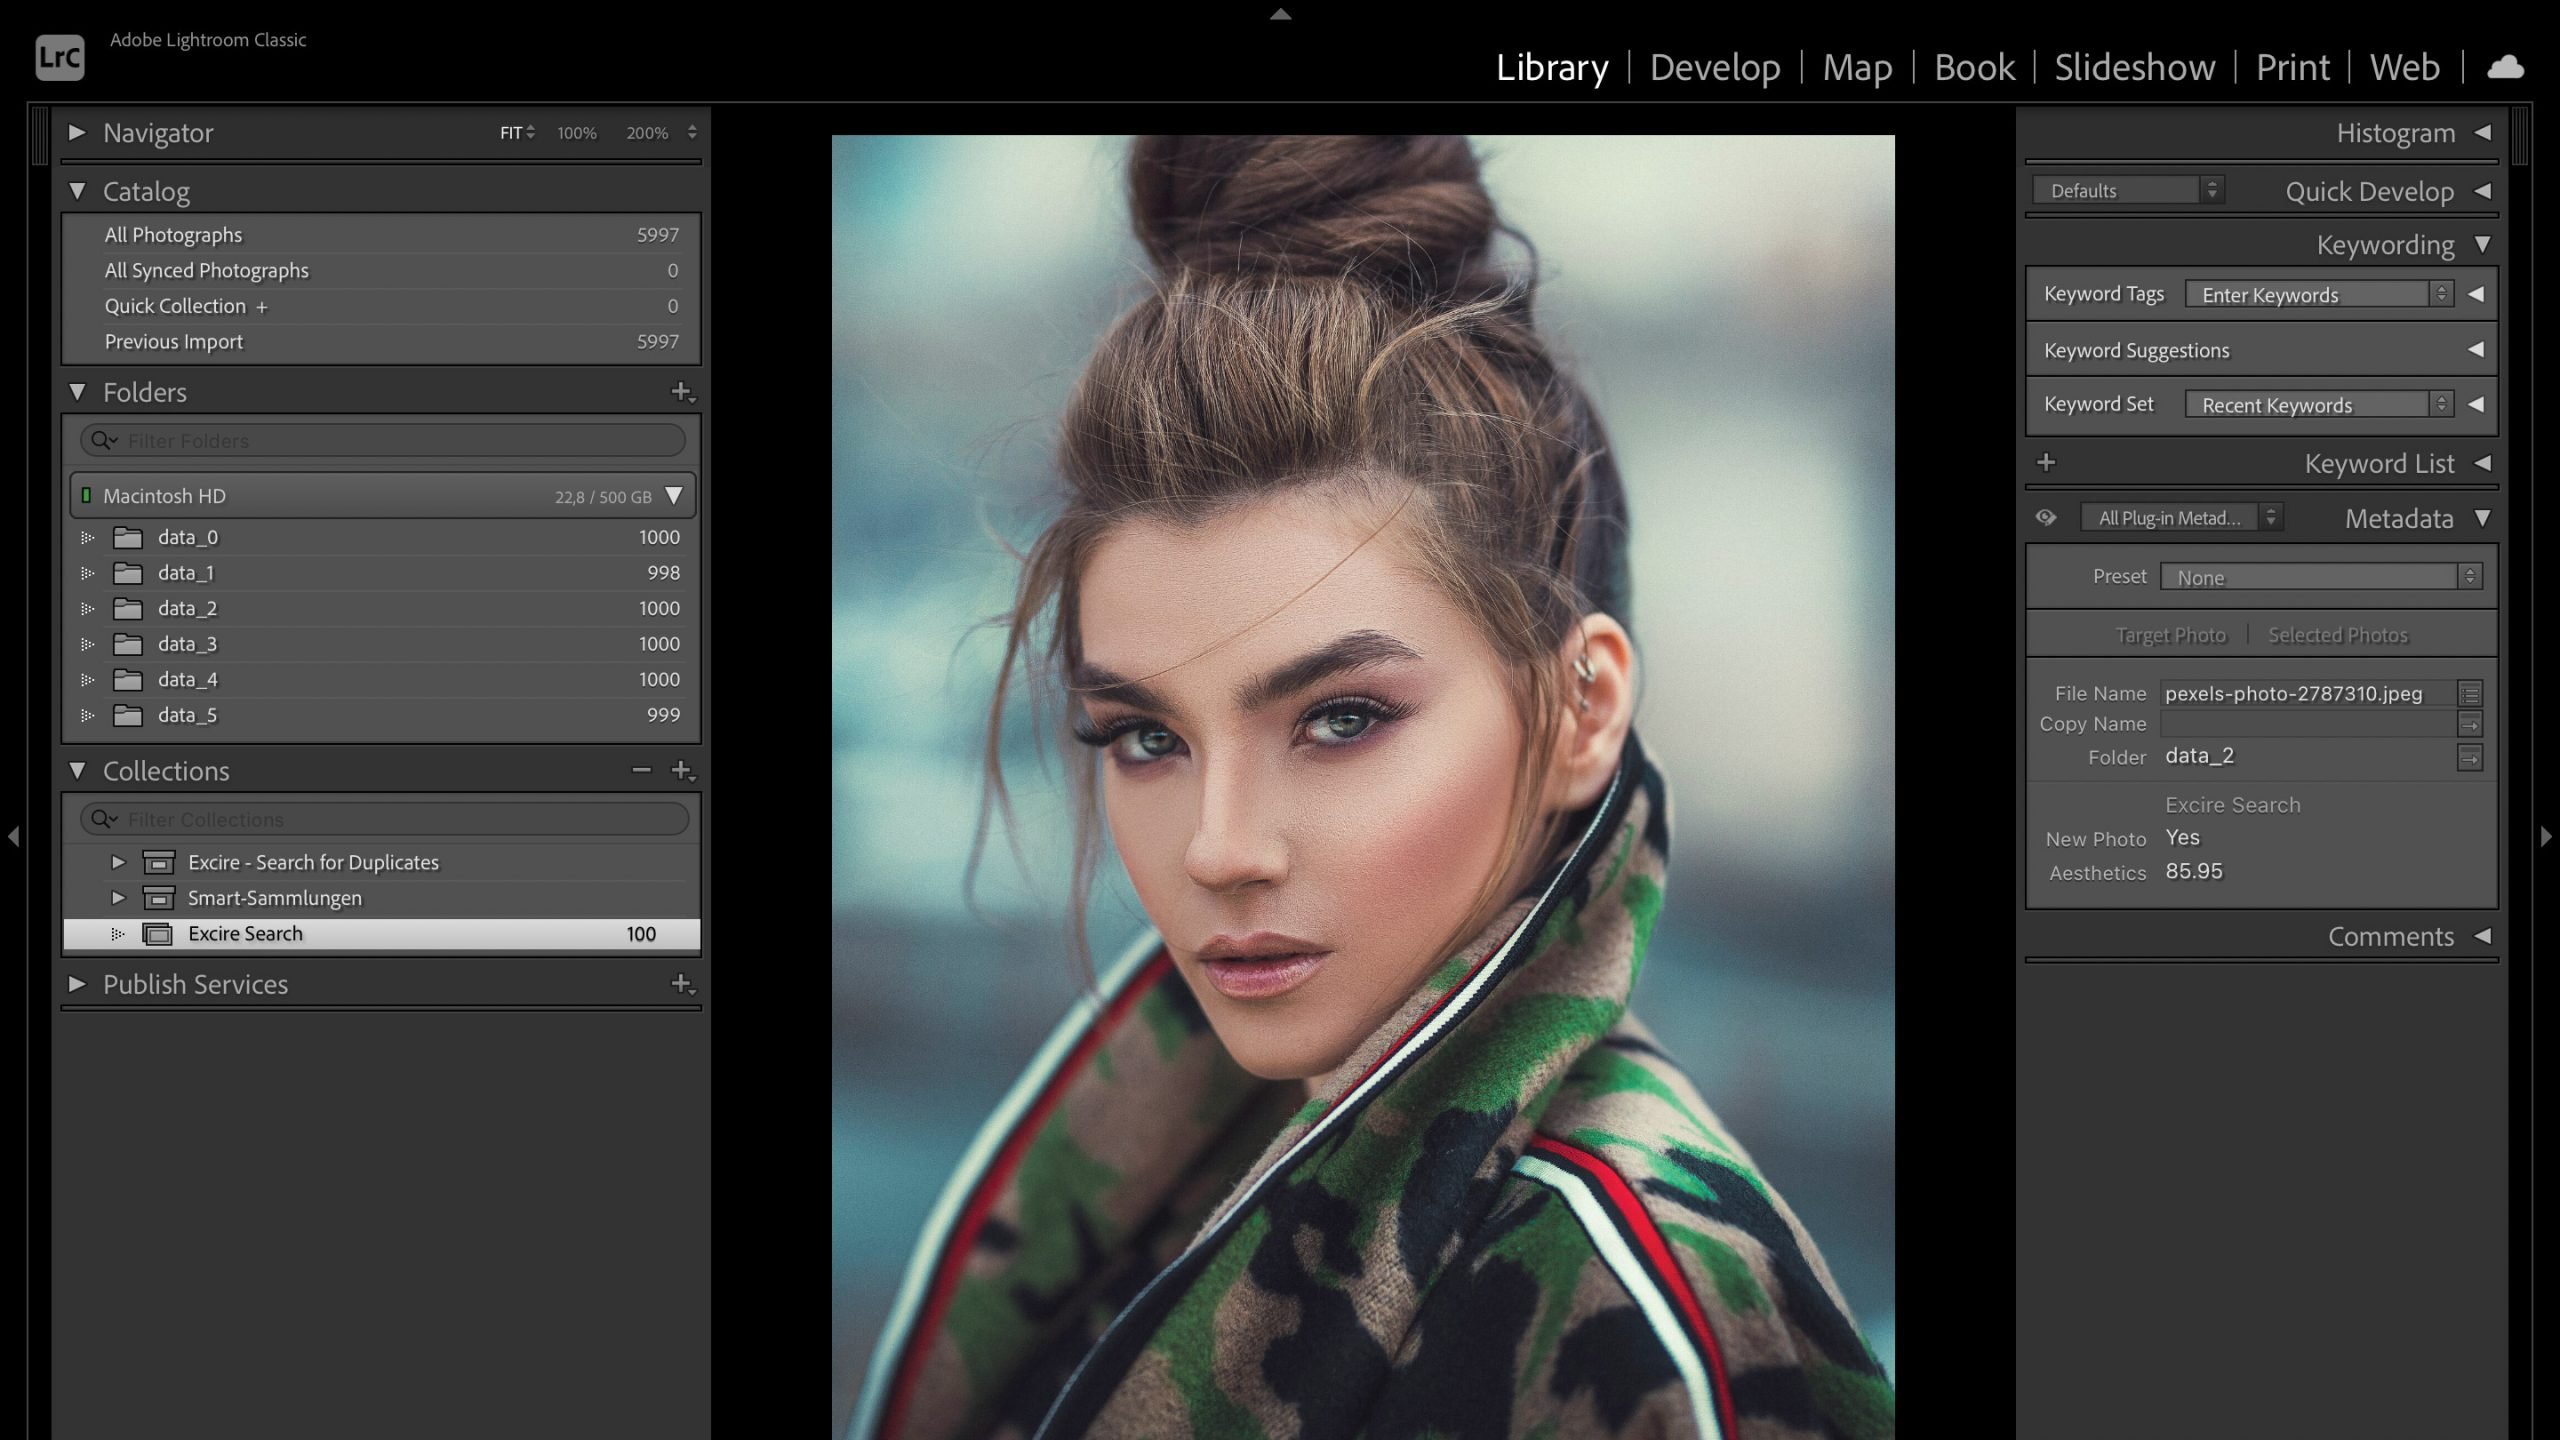 Excire plugin brings AI text search to Lightroom